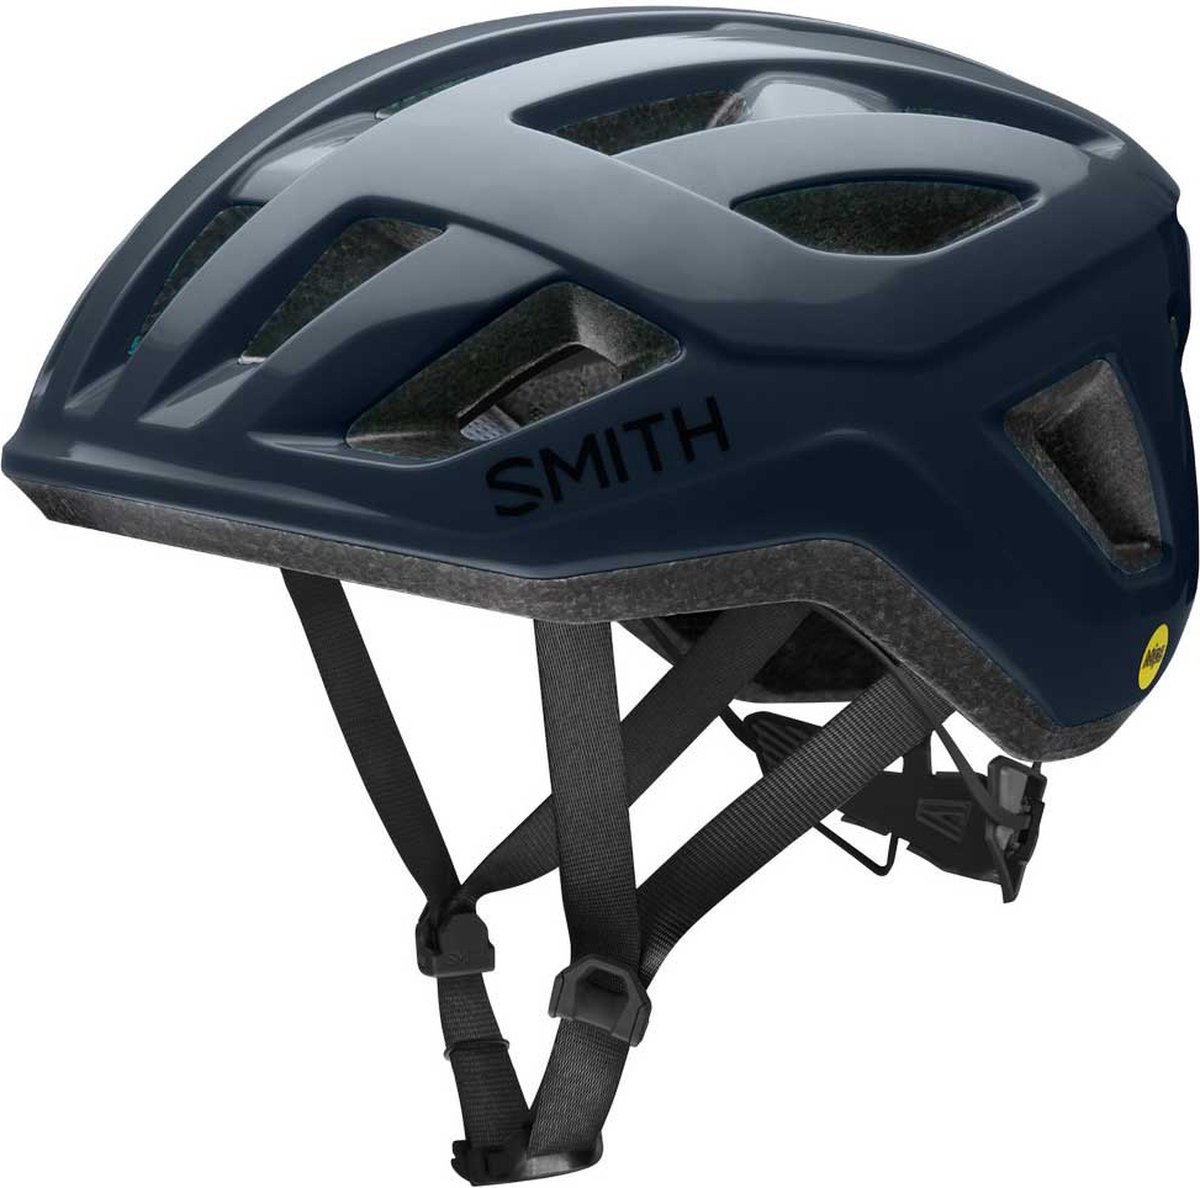 SMITH - FIETSHELM - SIGNAL MIPS FRENCH NAVY 51-55 S